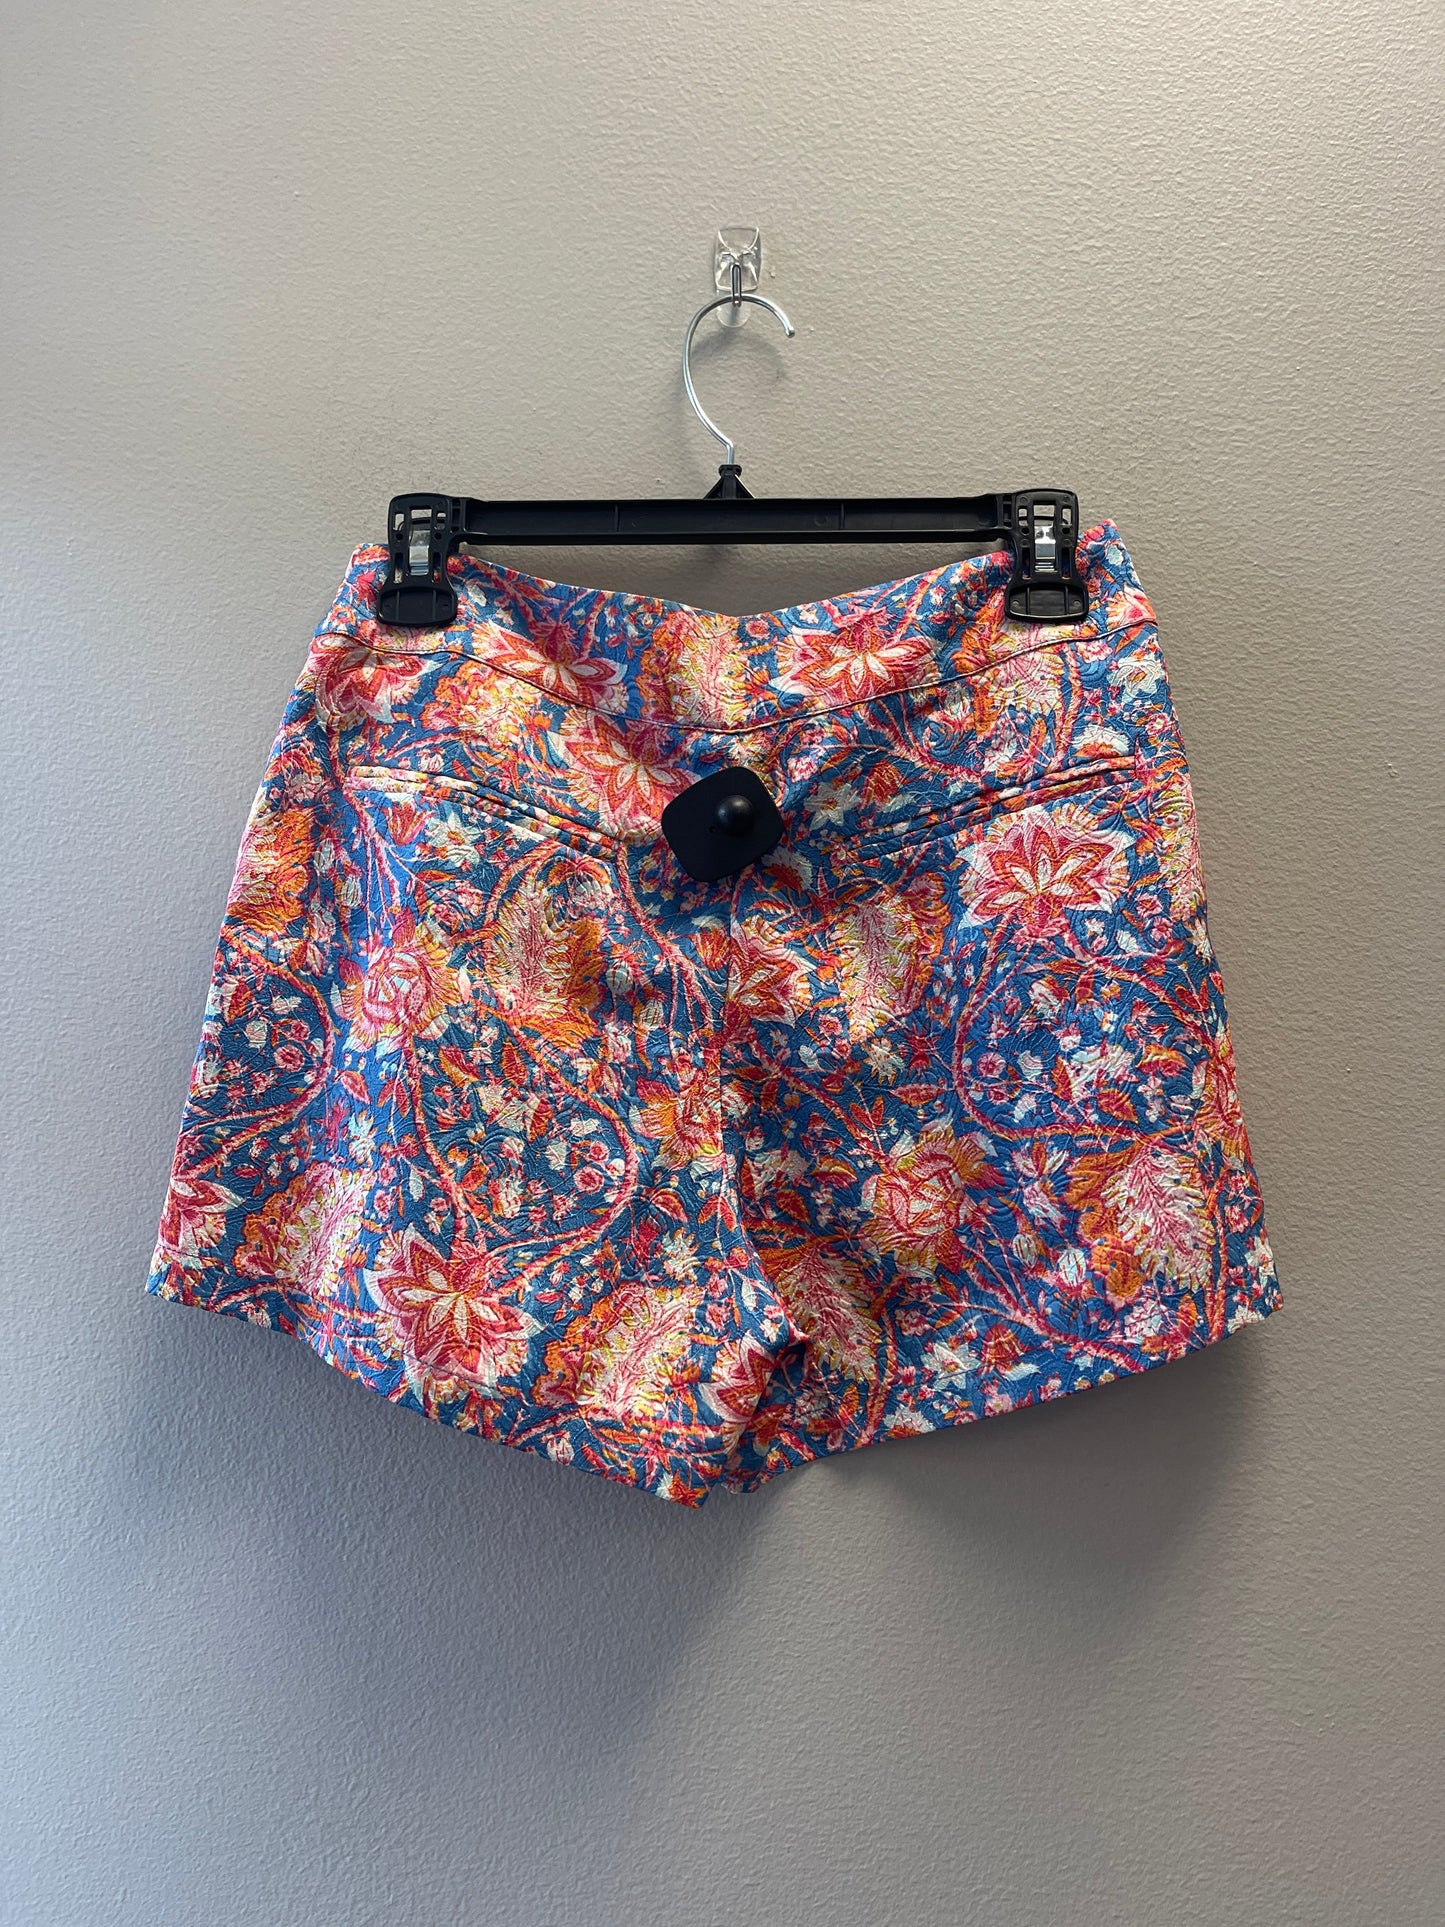 Shorts By Cmc  Size: 2